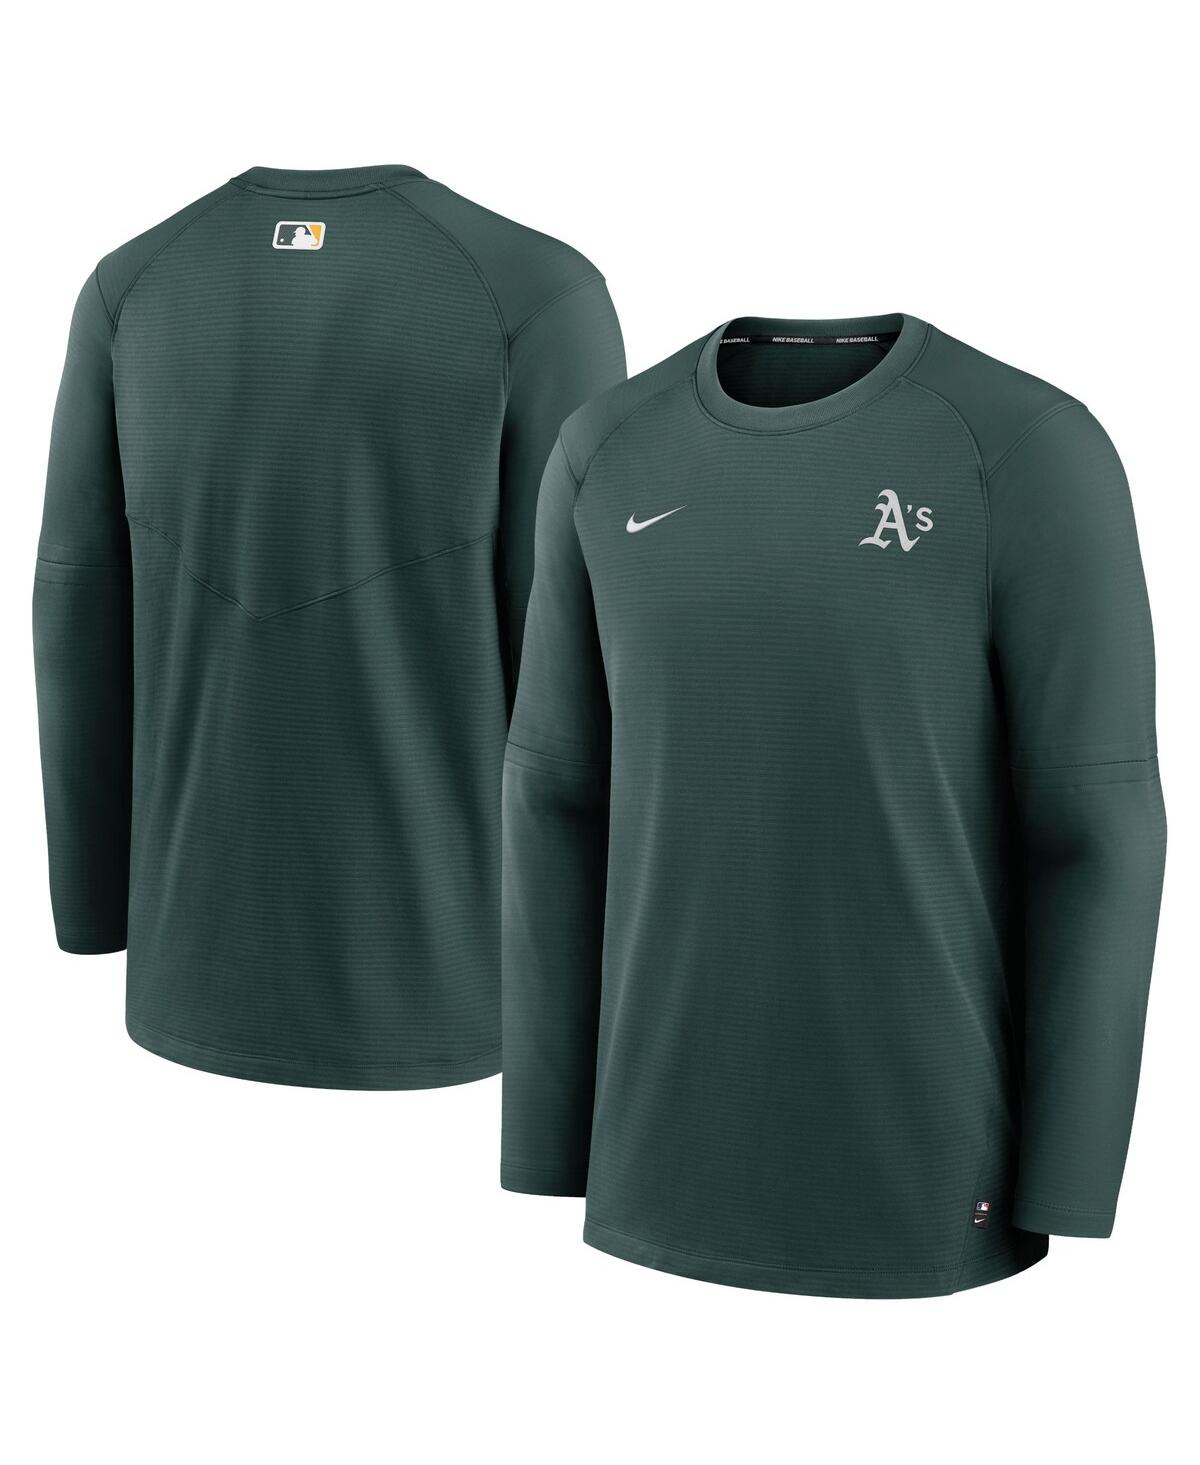 Shop Nike Men's  Green Oakland Athletics Authentic Collection Logo Performance Long Sleeve T-shirt